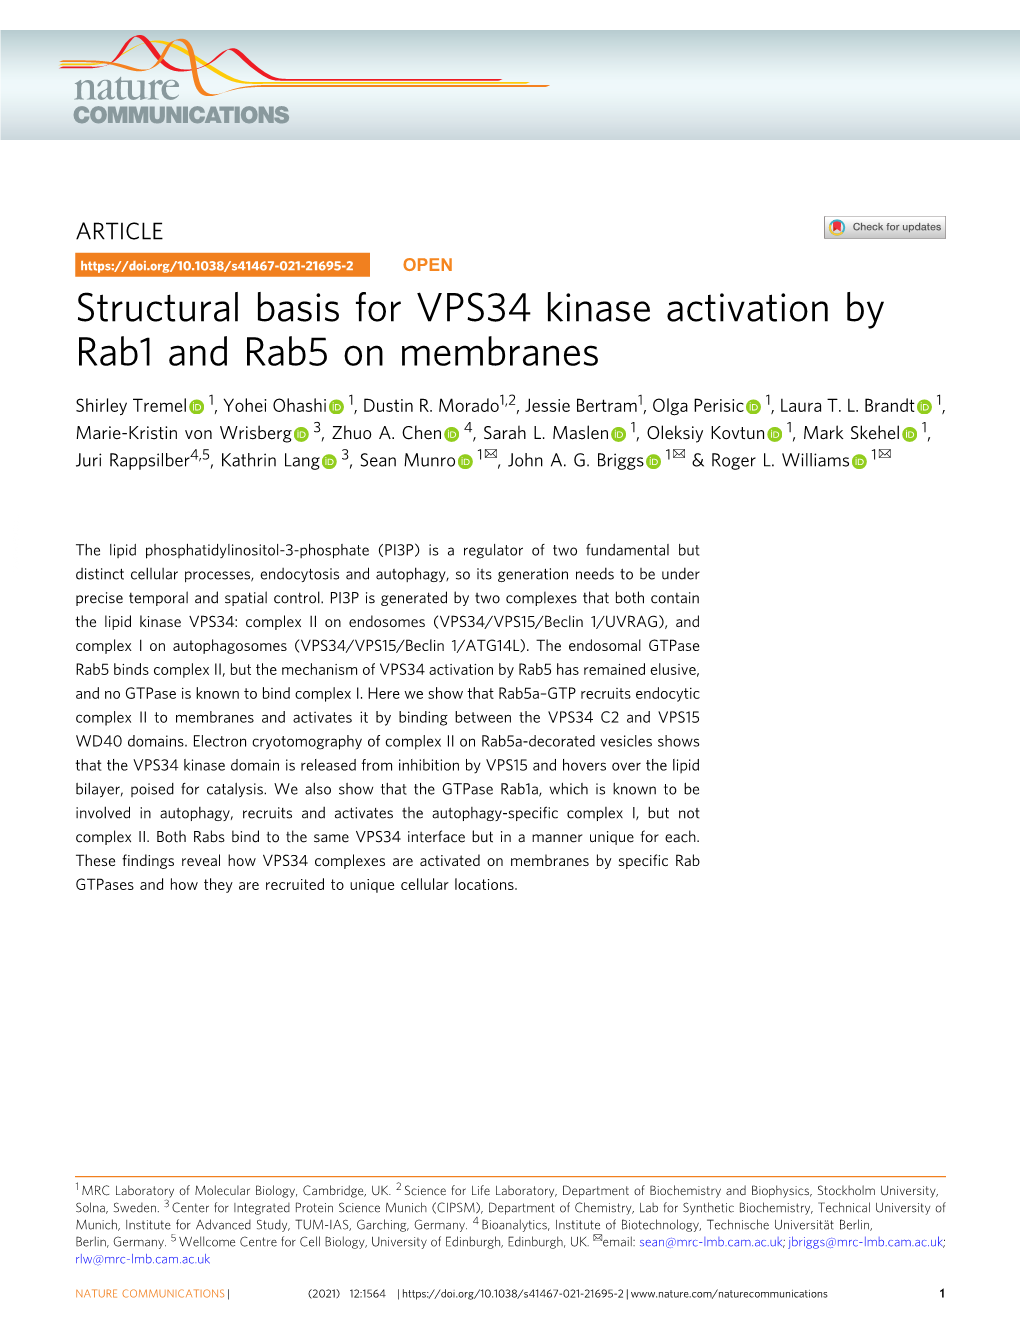 Structural Basis for VPS34 Kinase Activation by Rab1 and Rab5 on Membranes